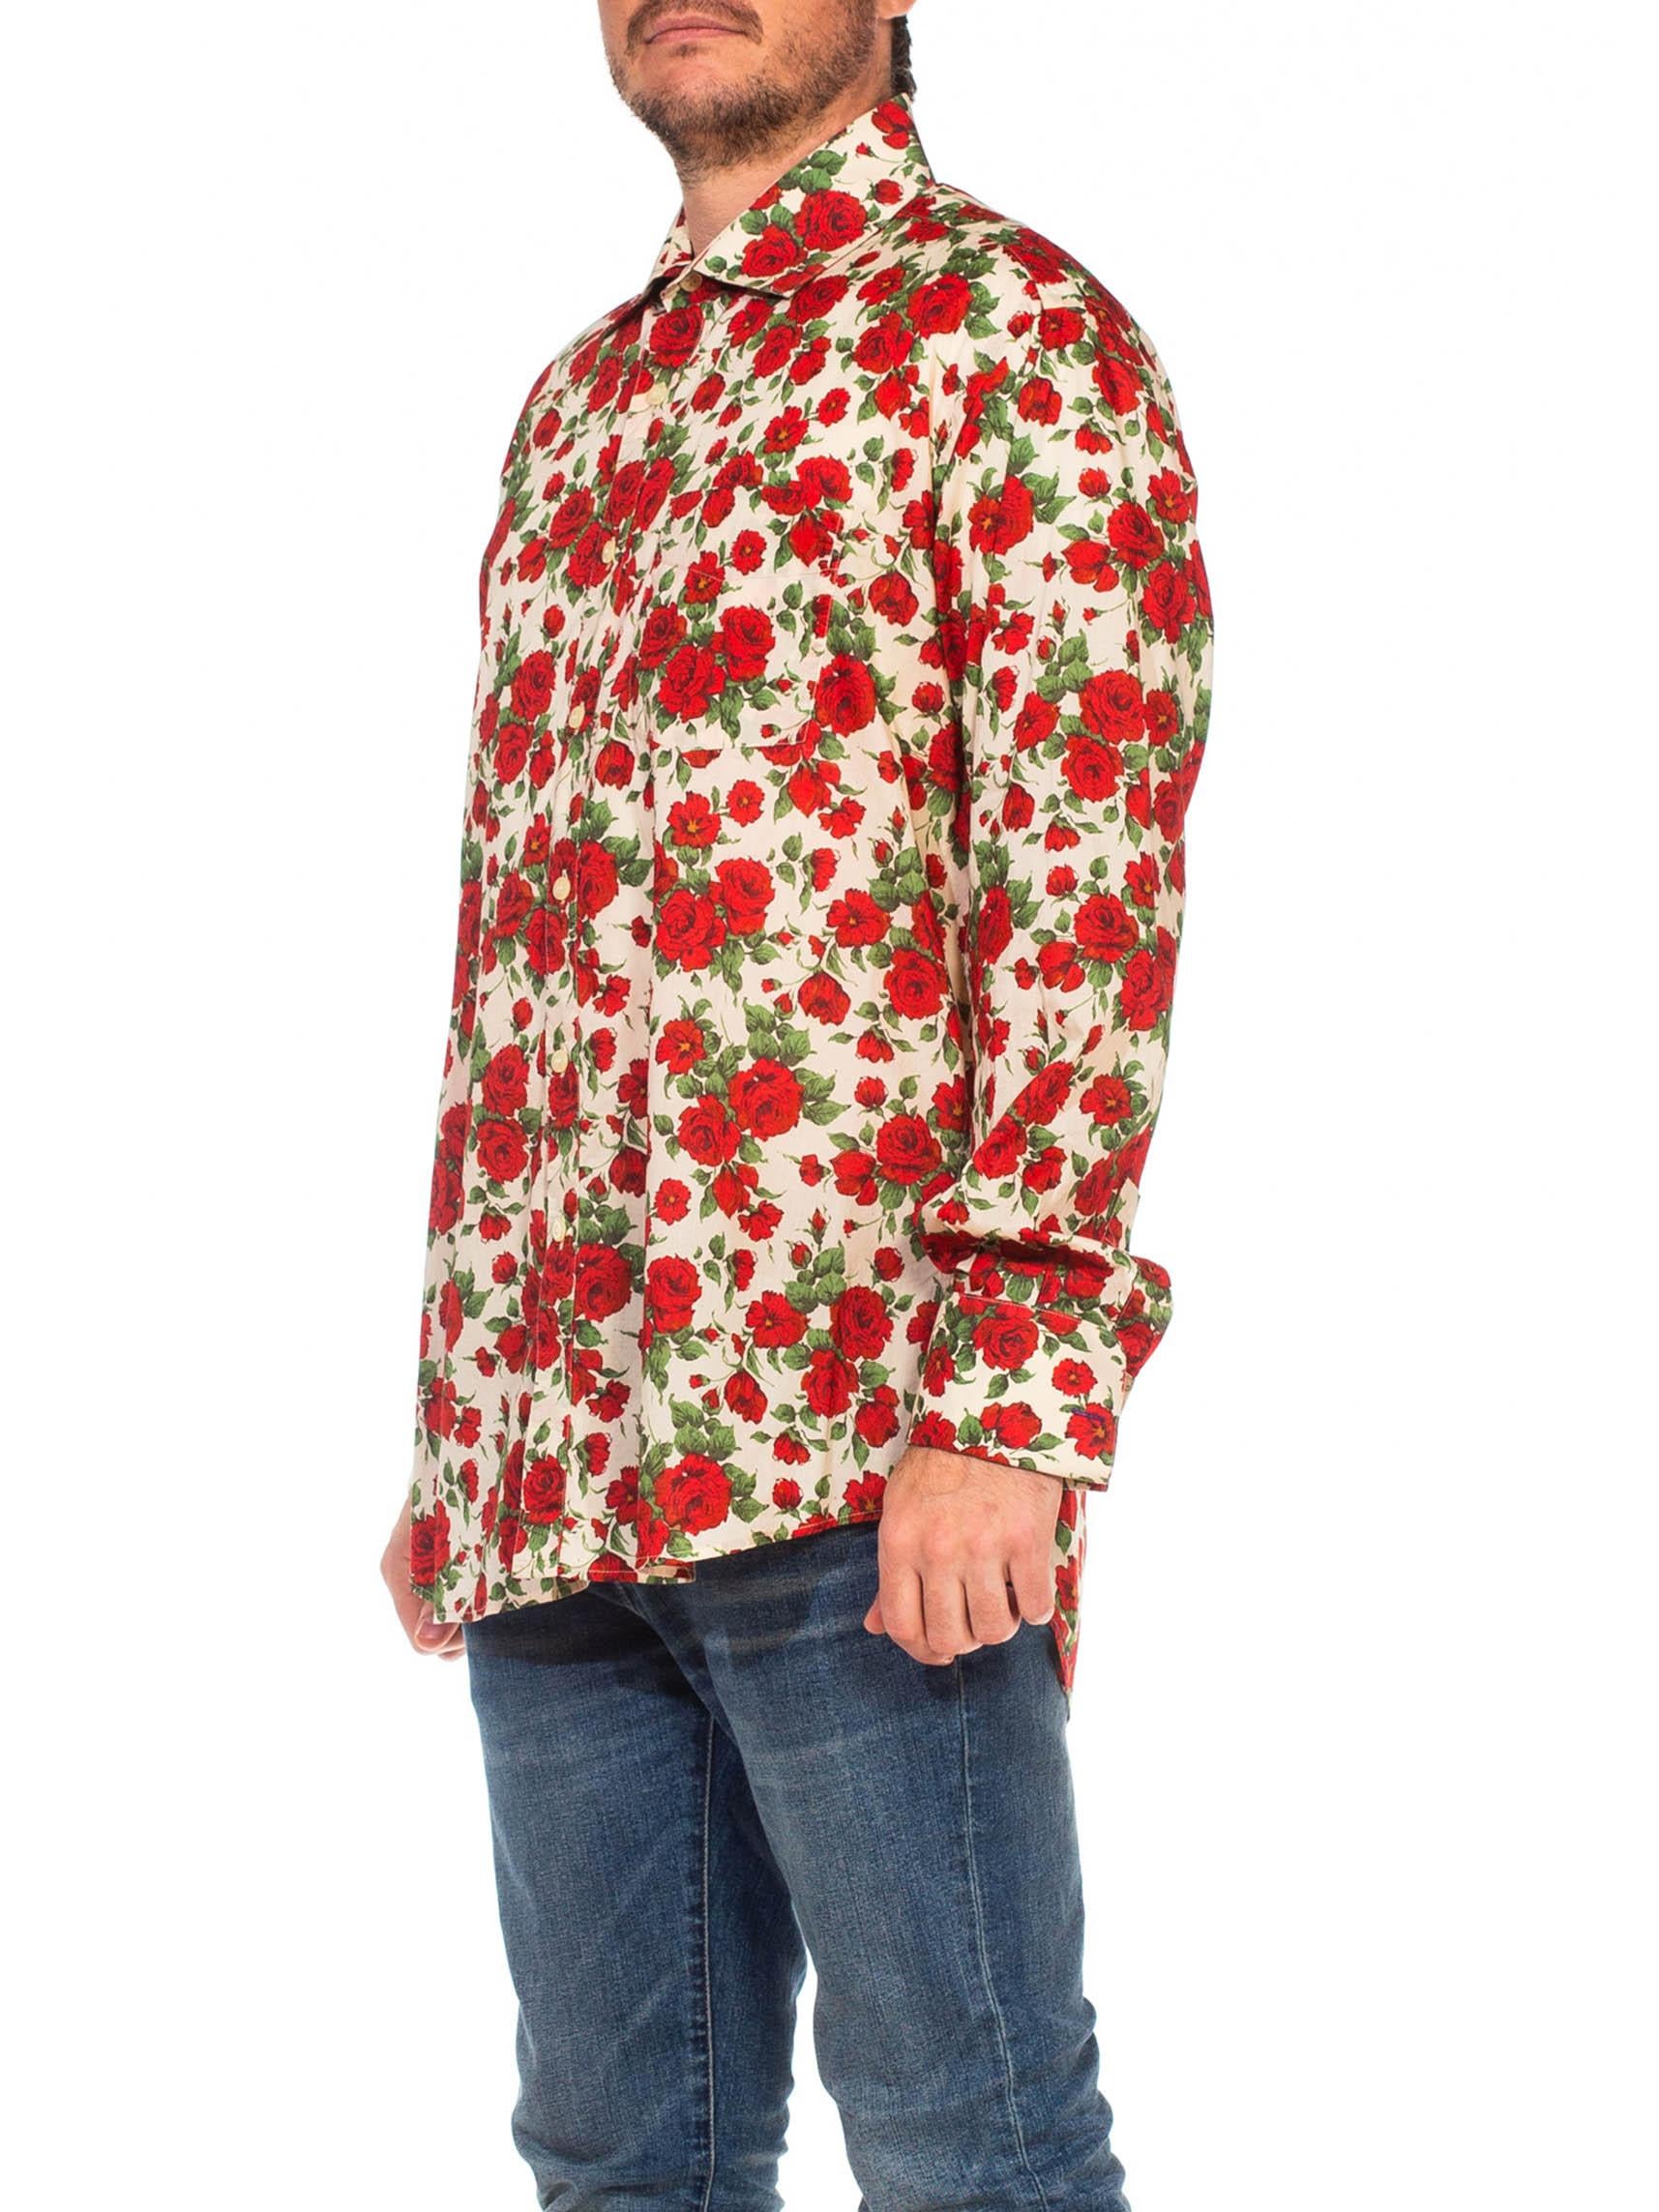 2000S PAUL SMITH Red Rose Floral Print Cotton Long Sleeve French Cuff Men's Shirt